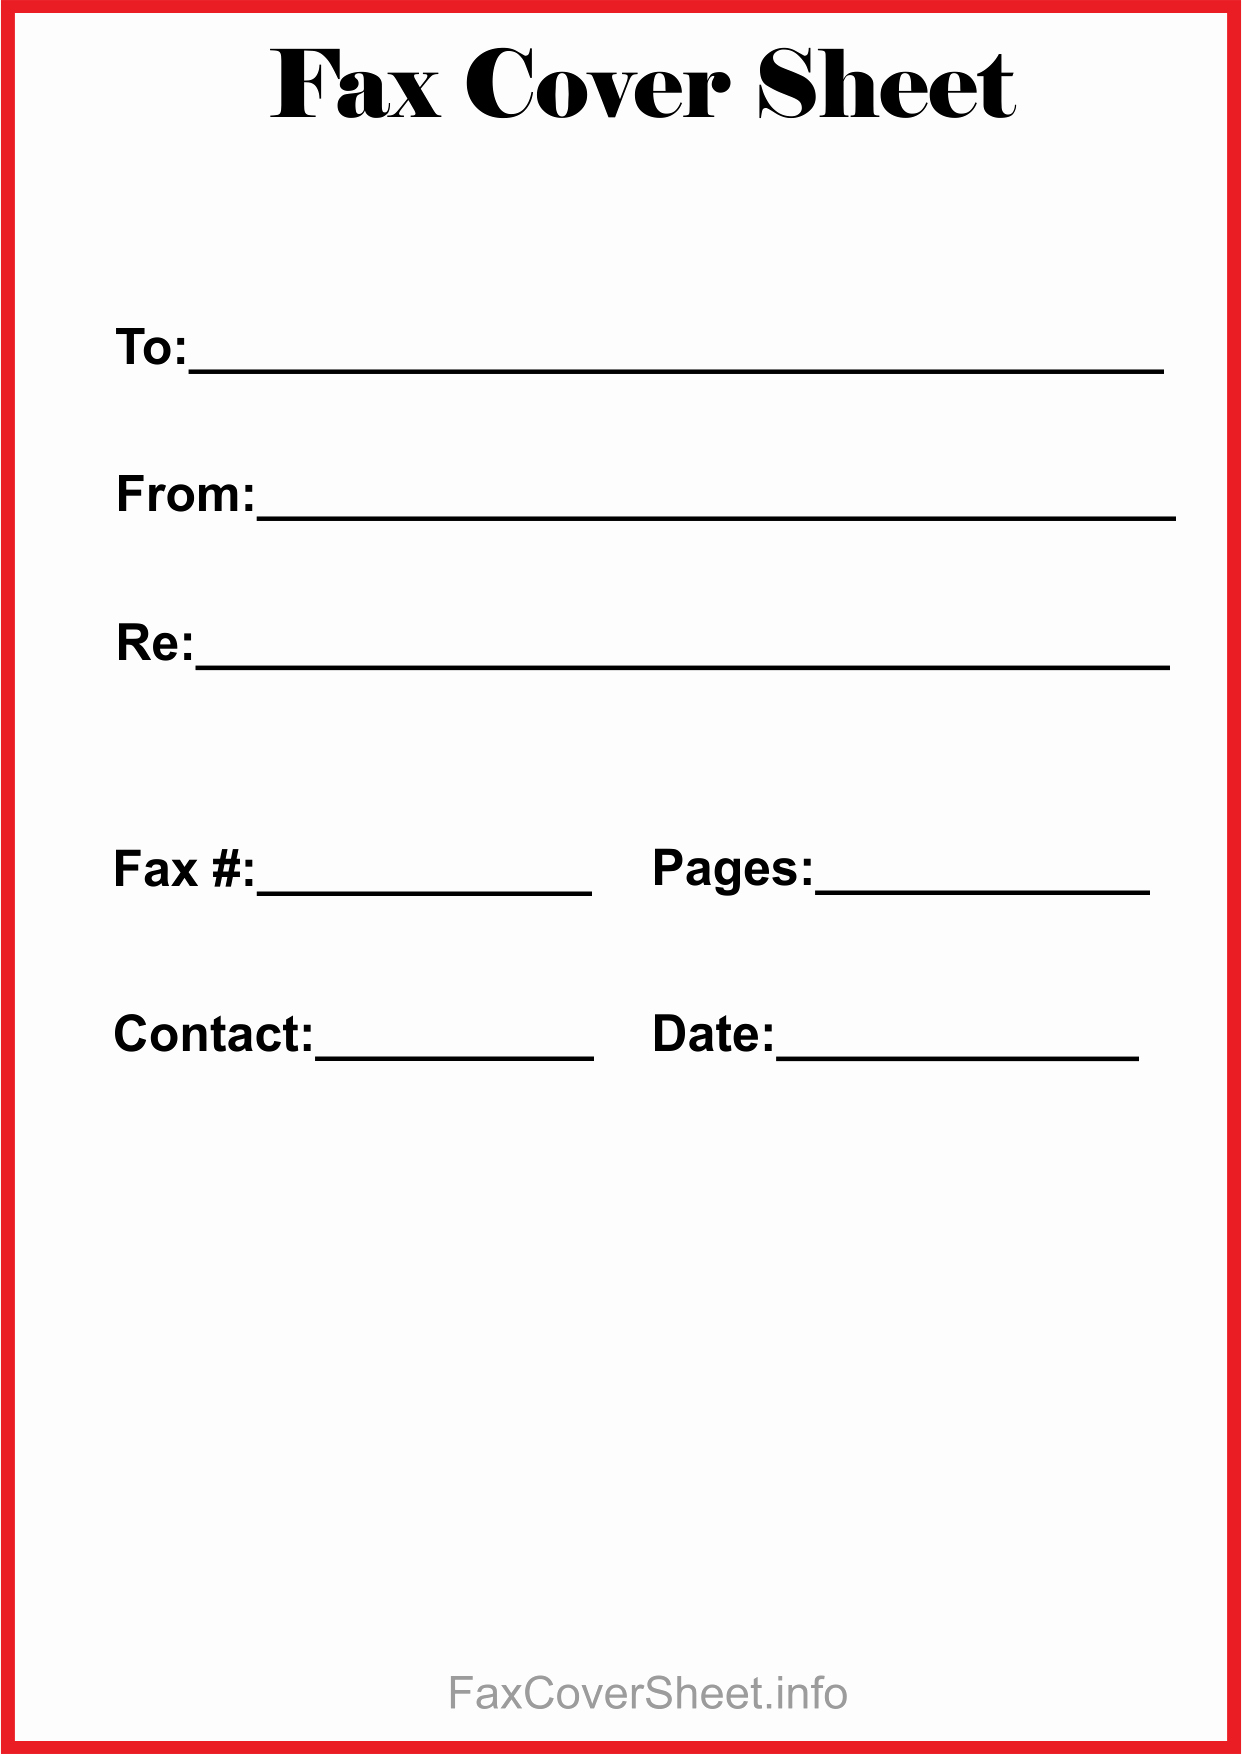 Microsoft Word Fax Cover Sheet Unique Free Fax Cover Sheet Template Download